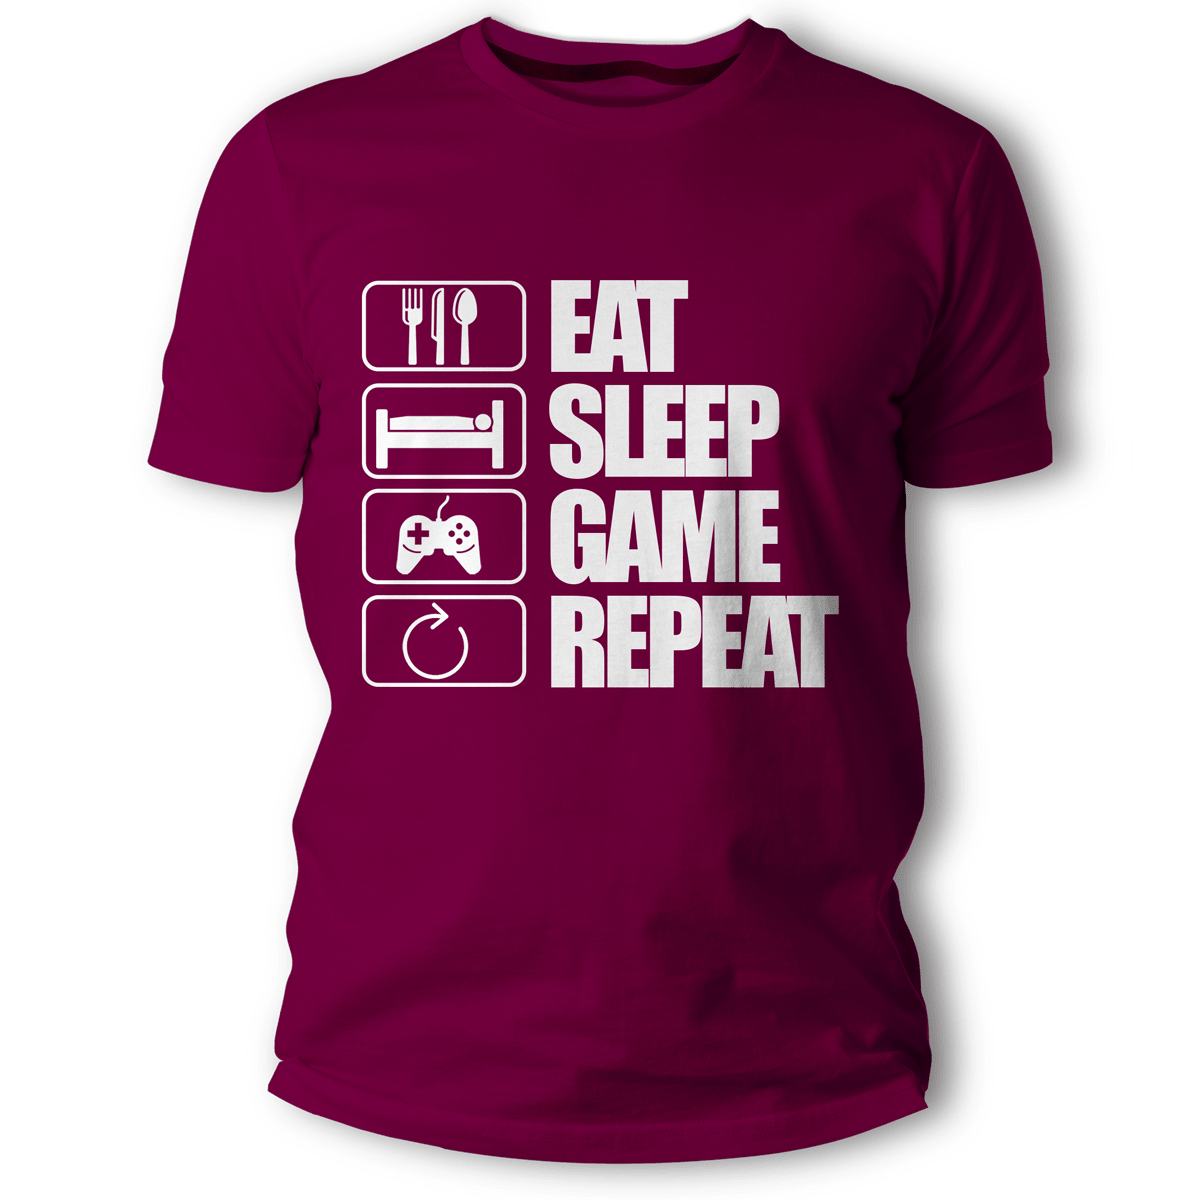 Check out this awesome 'GAMER+LIFE+-+EAT+SLEEP+GAME+REPEAT' design